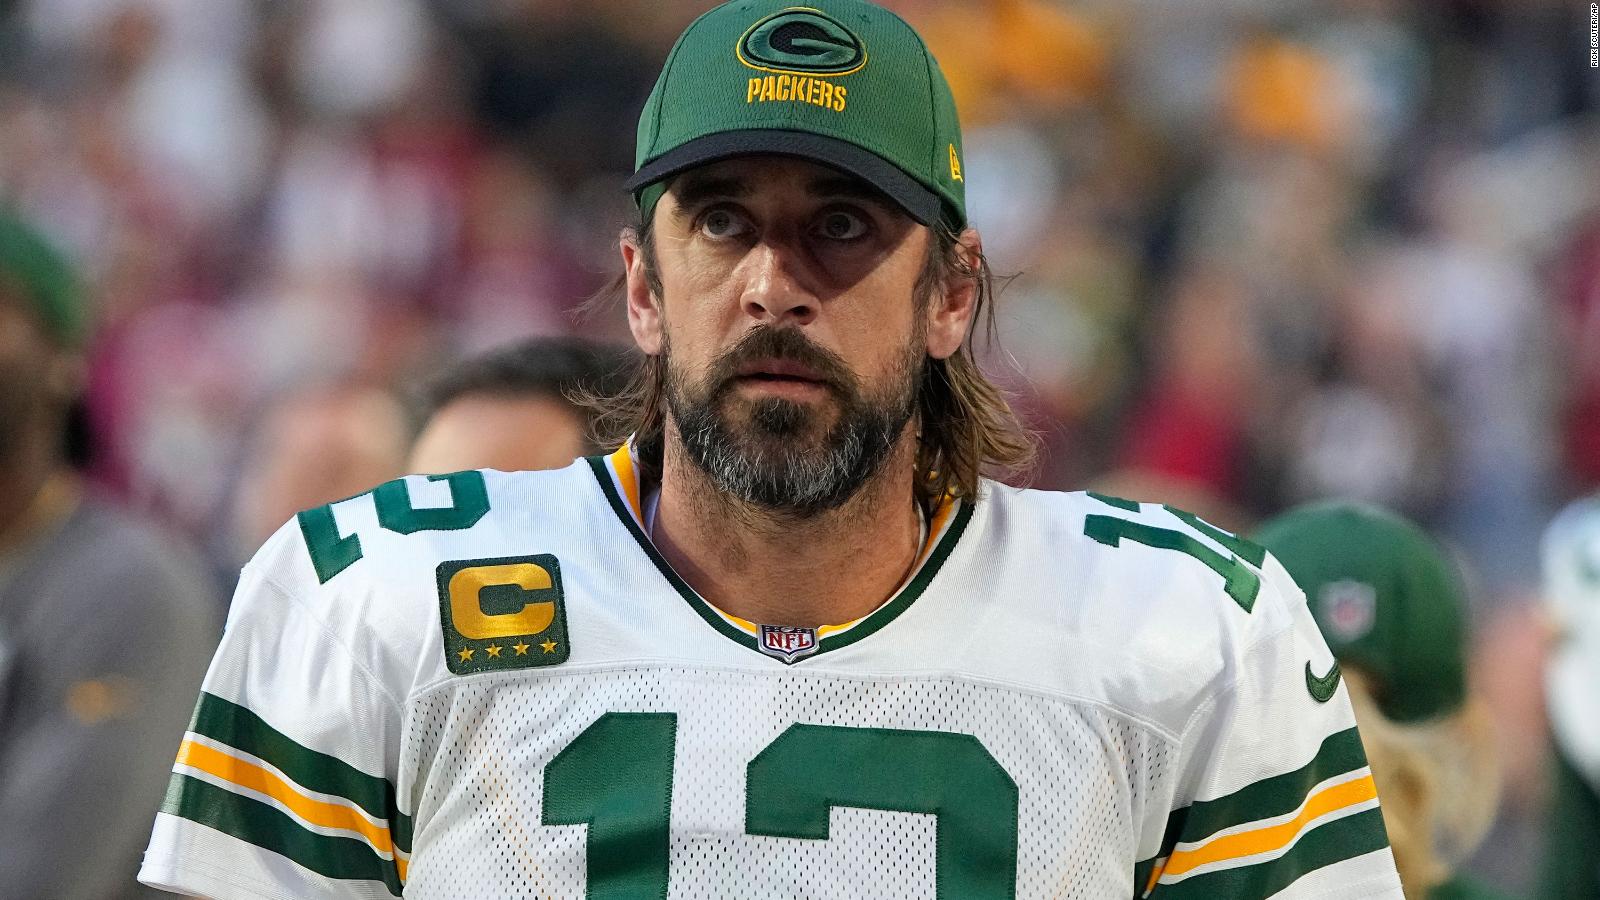 Covid-19: NFL multa a Green Bay Packers y Aaron Rodgers